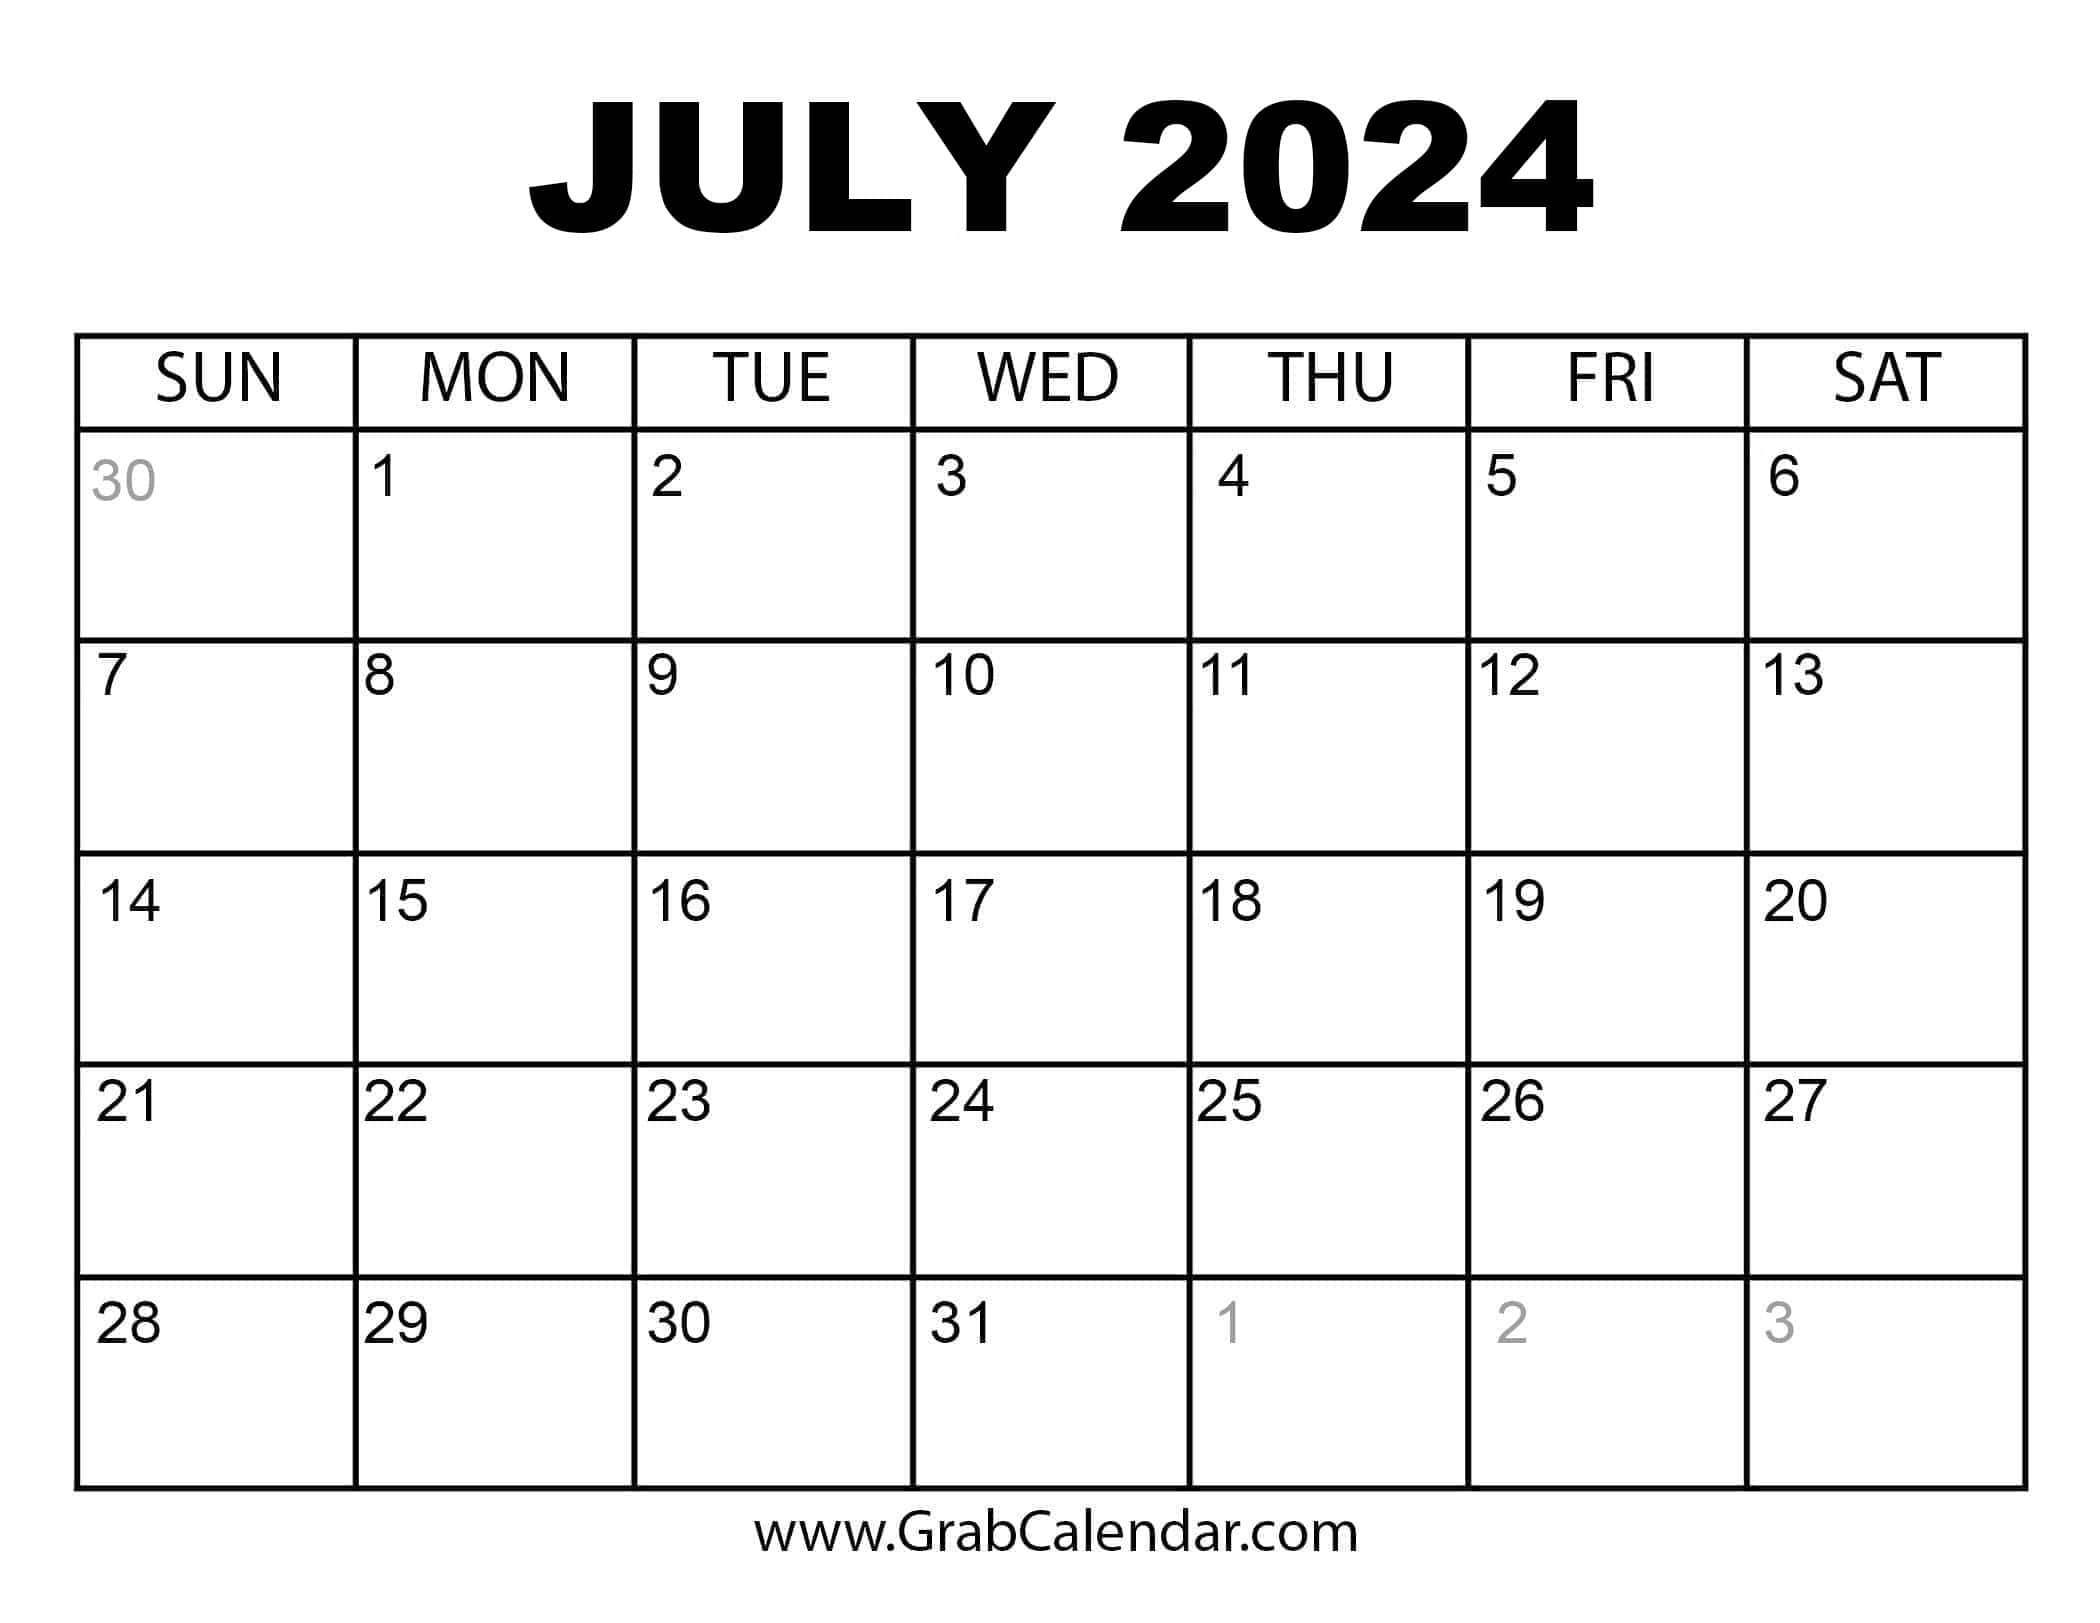 Printable July 2024 Calendar | Give Me The Calendar For The Month Of July 2024